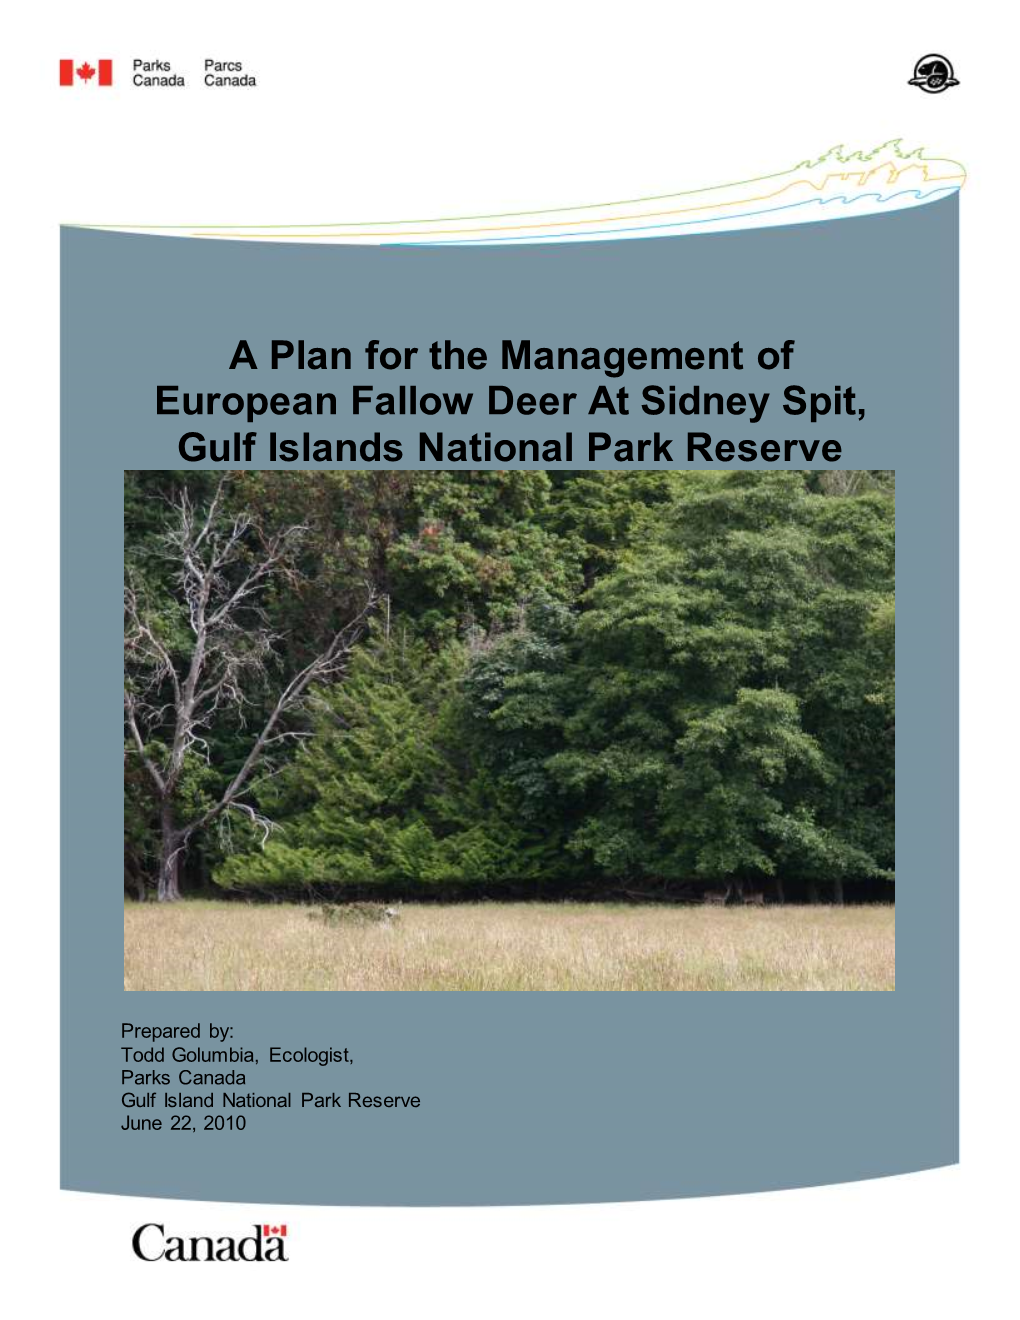 A Plan for the Management of European Fallow Deer at Sidney Spit, Gulf Islands National Park Reserve